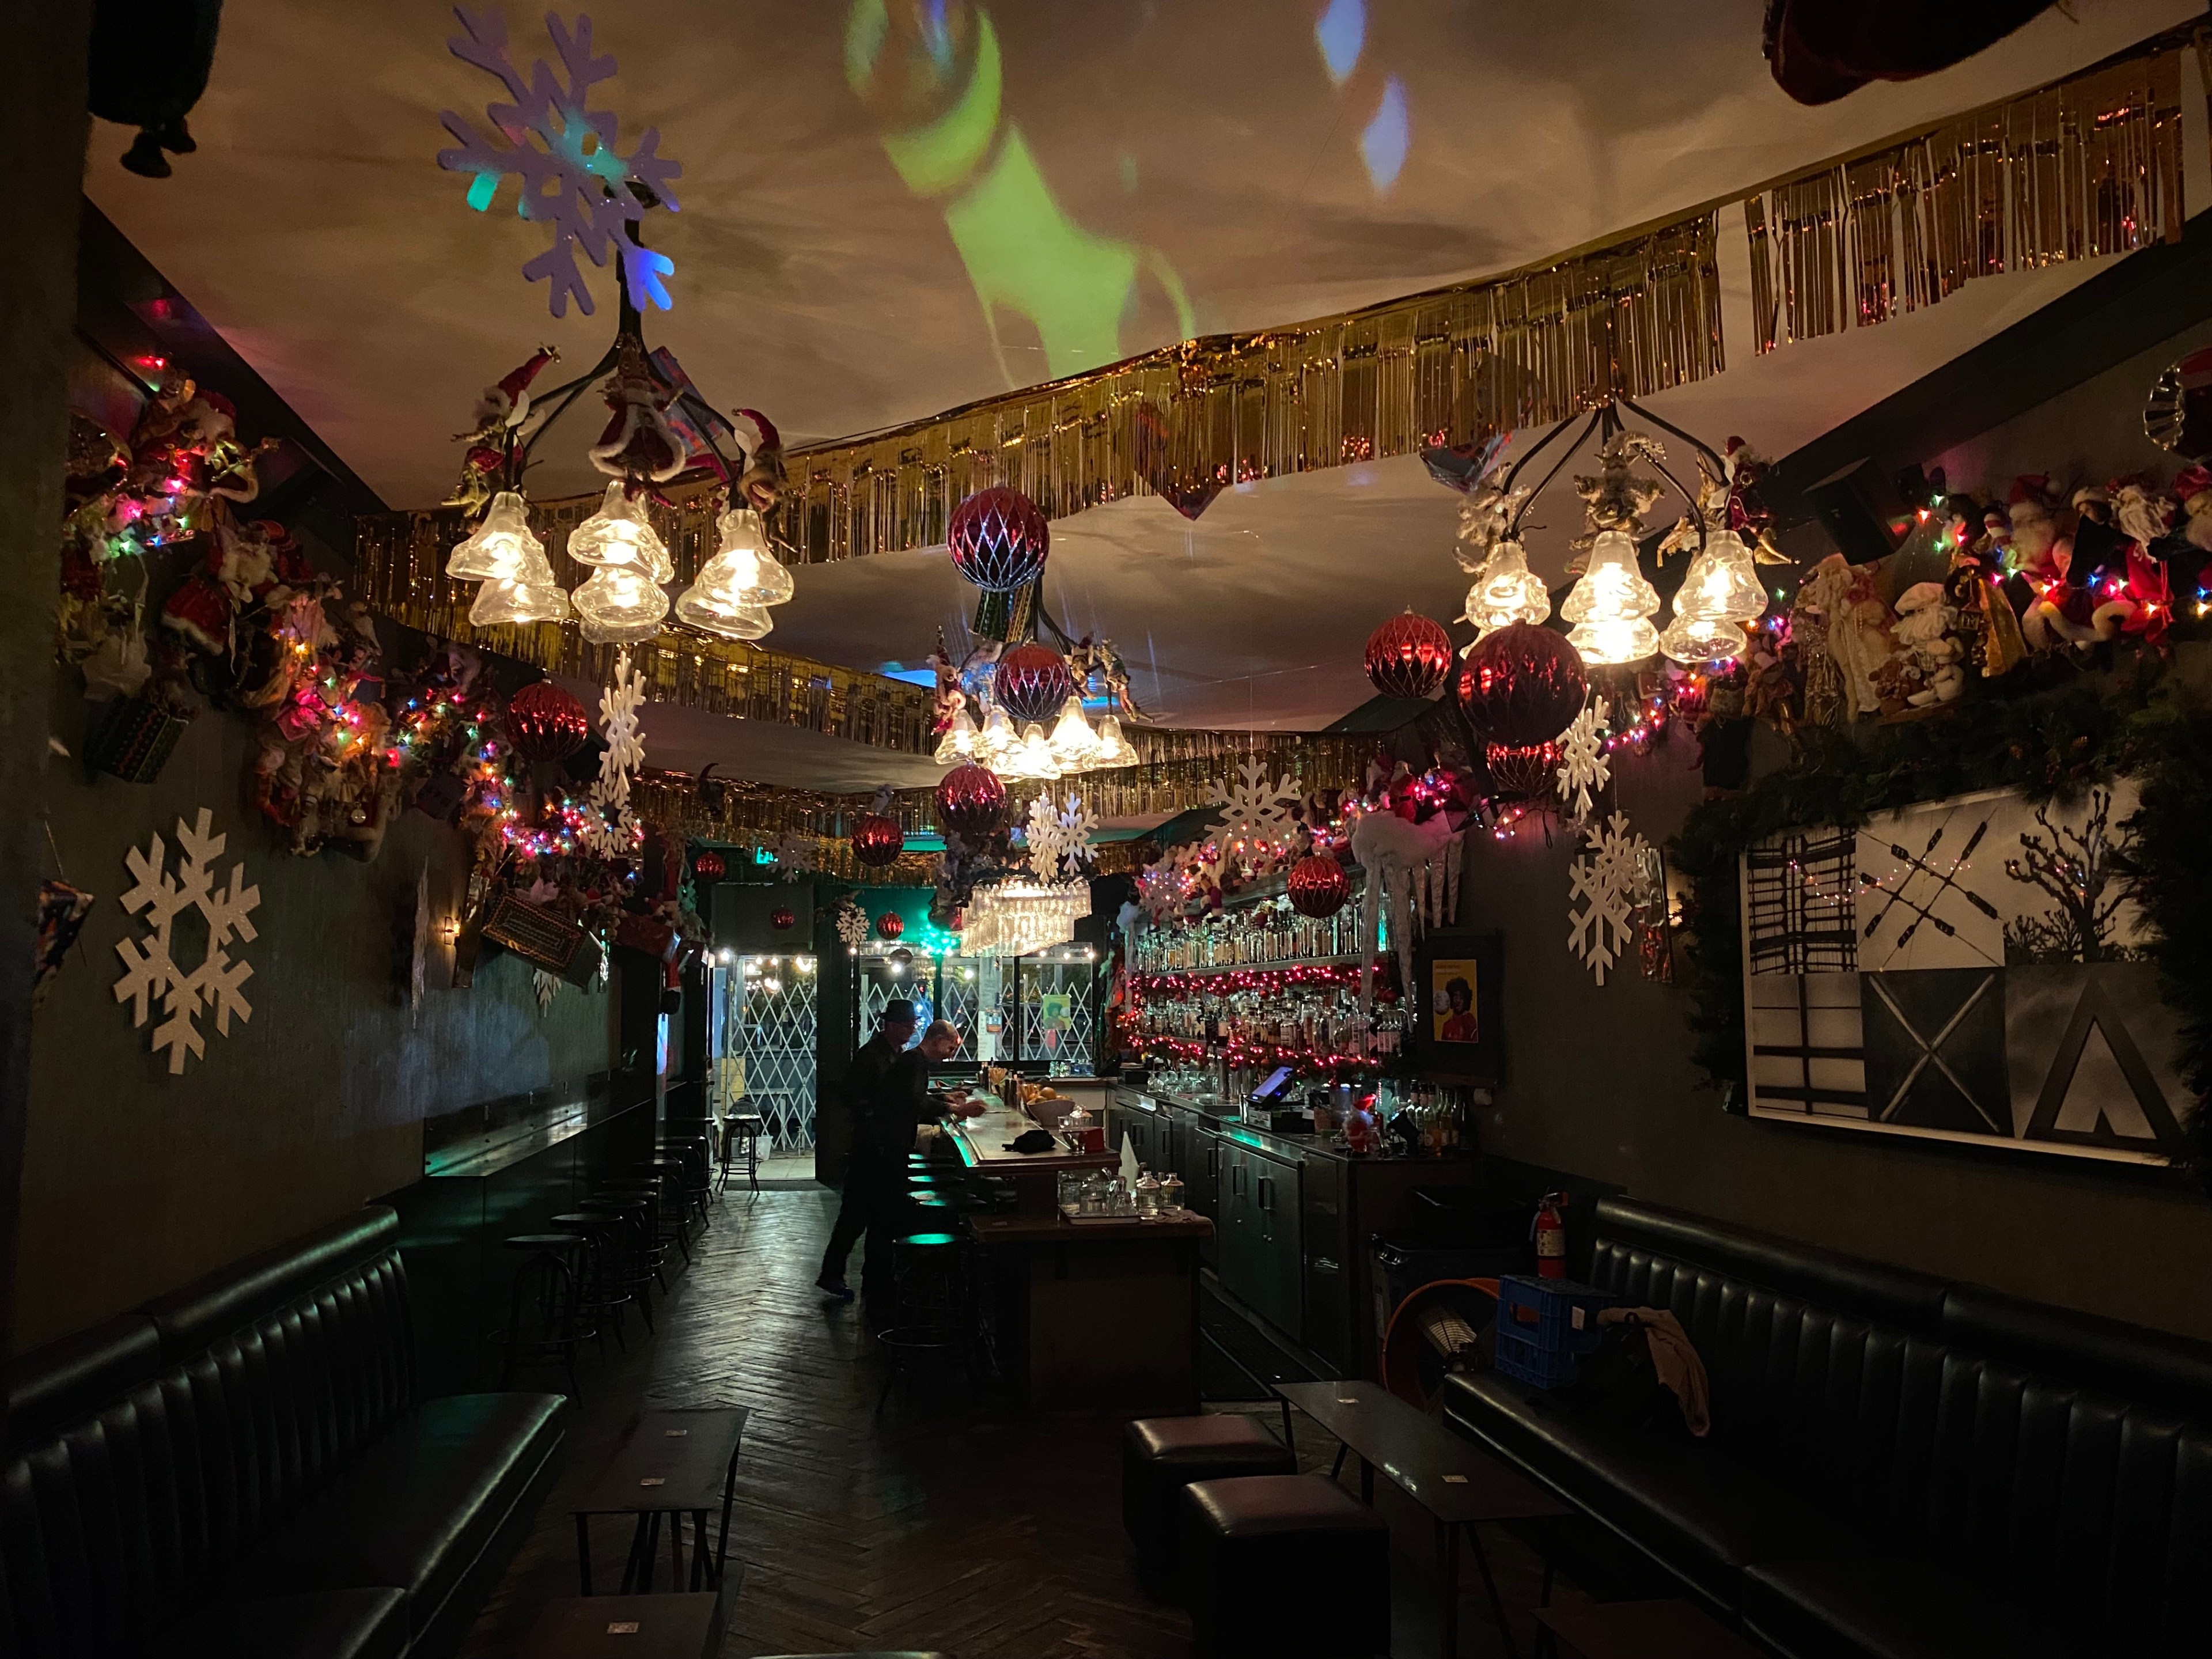 A dark bar with chandeliers is decorated with tinsel, glittering garlands, snowflake cut-outs and hundreds of vintage Santa dolls.  